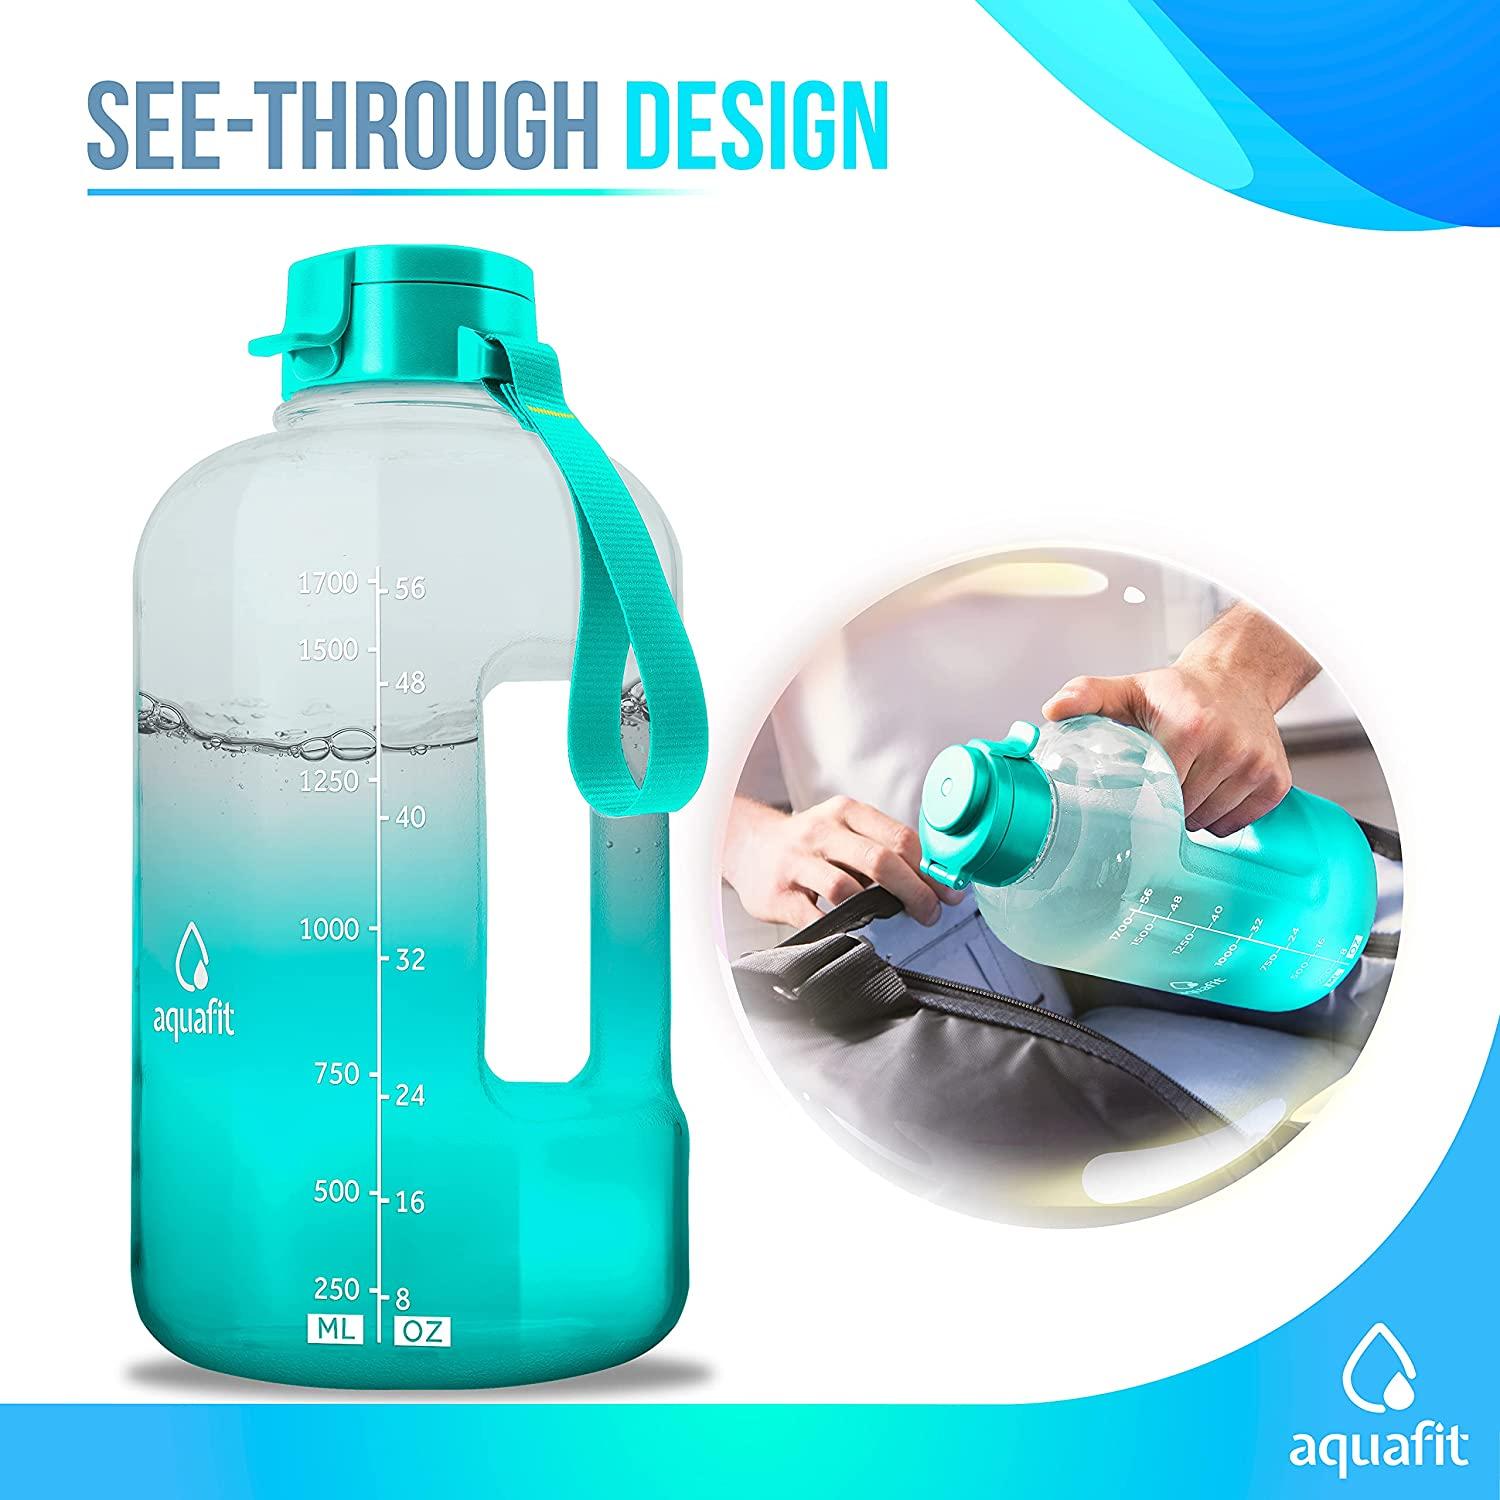 Large Half Gallon/64 Oz Water Bottle, Motivational Big Water Bottles with  Straw